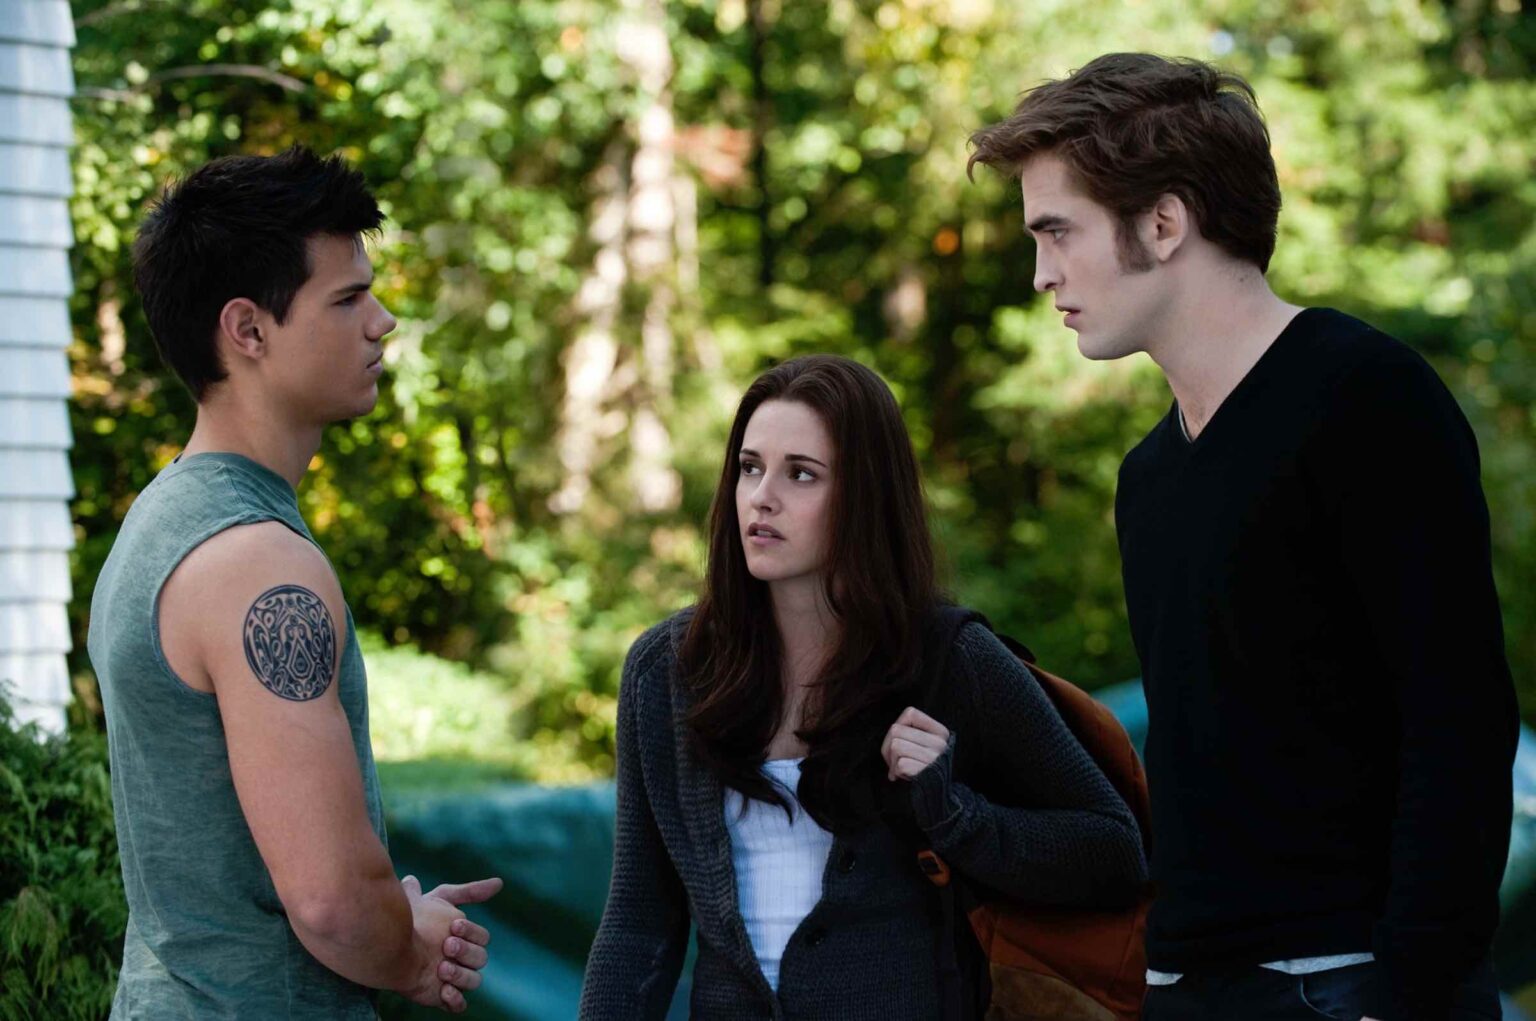 A decade after its release, the 'Twilight' saga is a streaming phenomenon for the Z Generation. Is this a sign for actors from 'Twilight' to reunite?